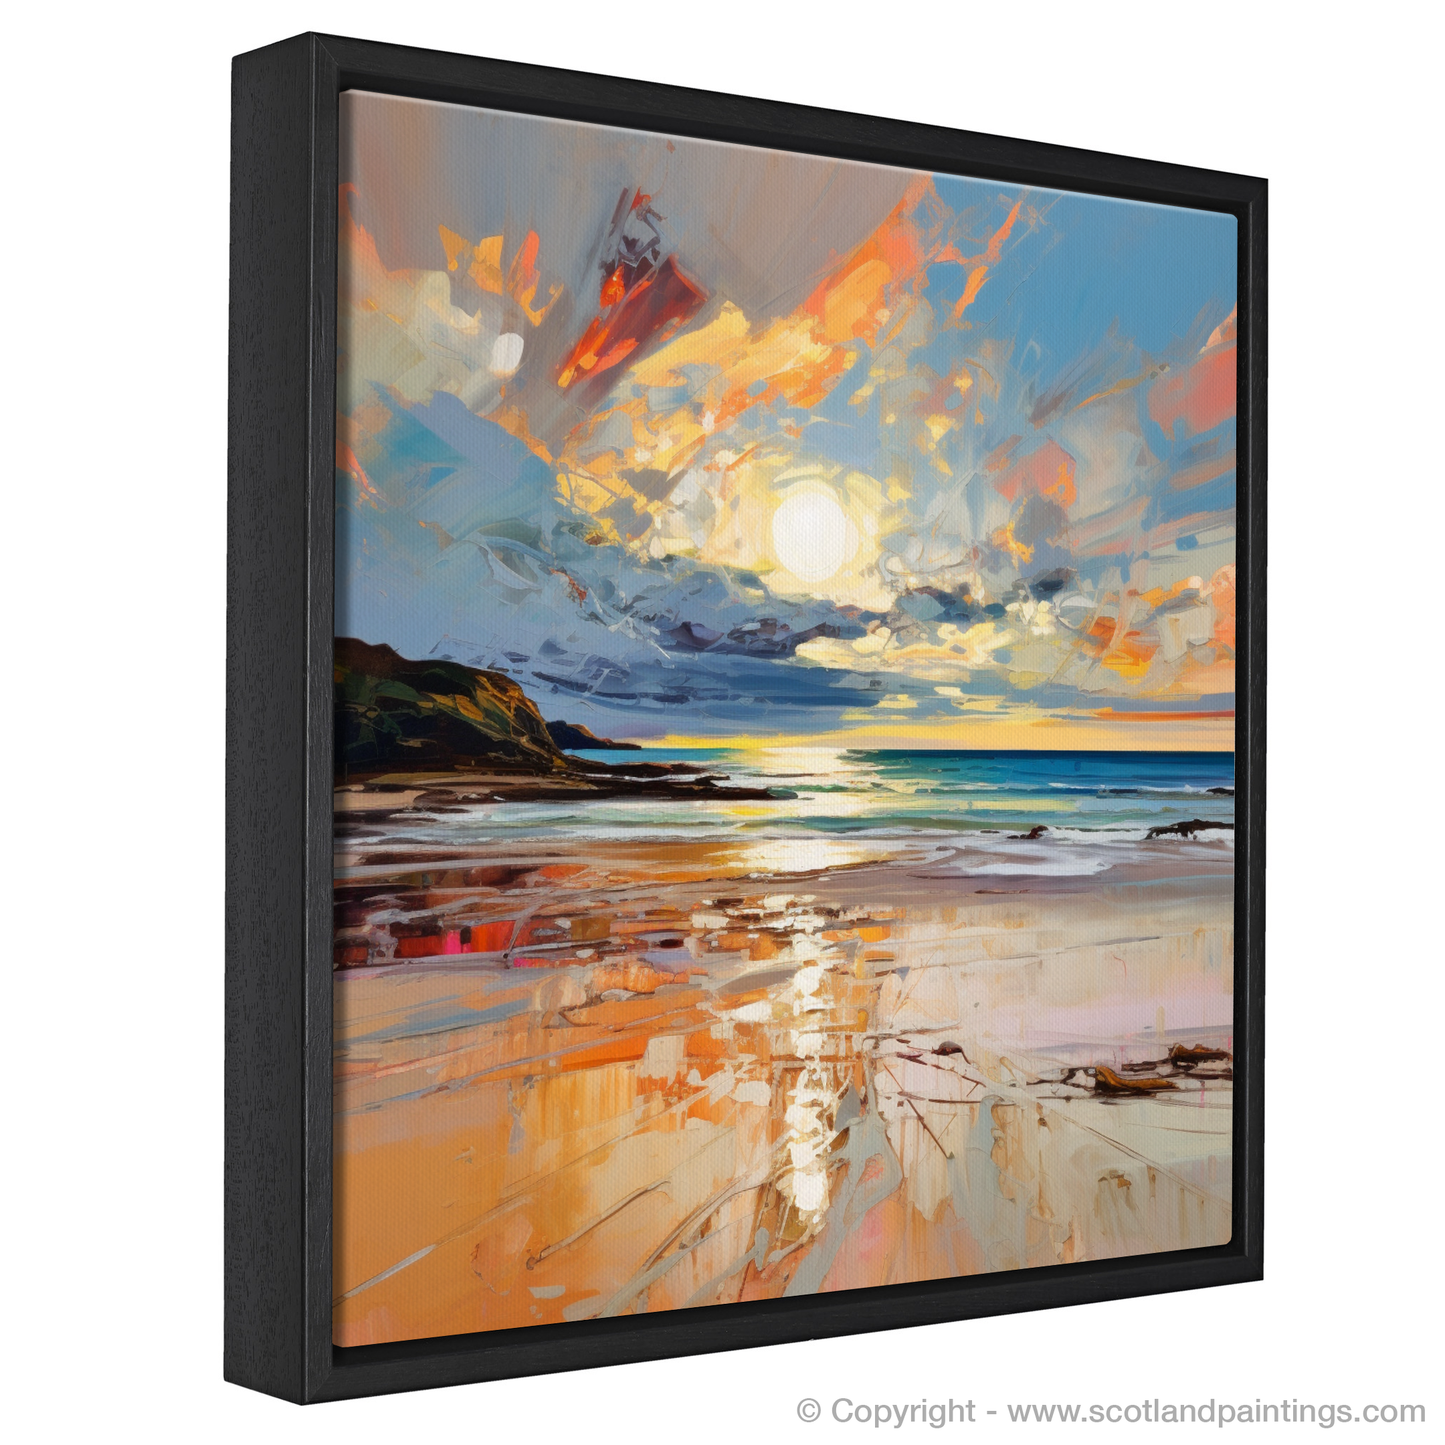 Painting and Art Print of Gullane Beach at sunset entitled "Gullane Beach at Sunset: An Expressionist Ode to Scottish Shores".